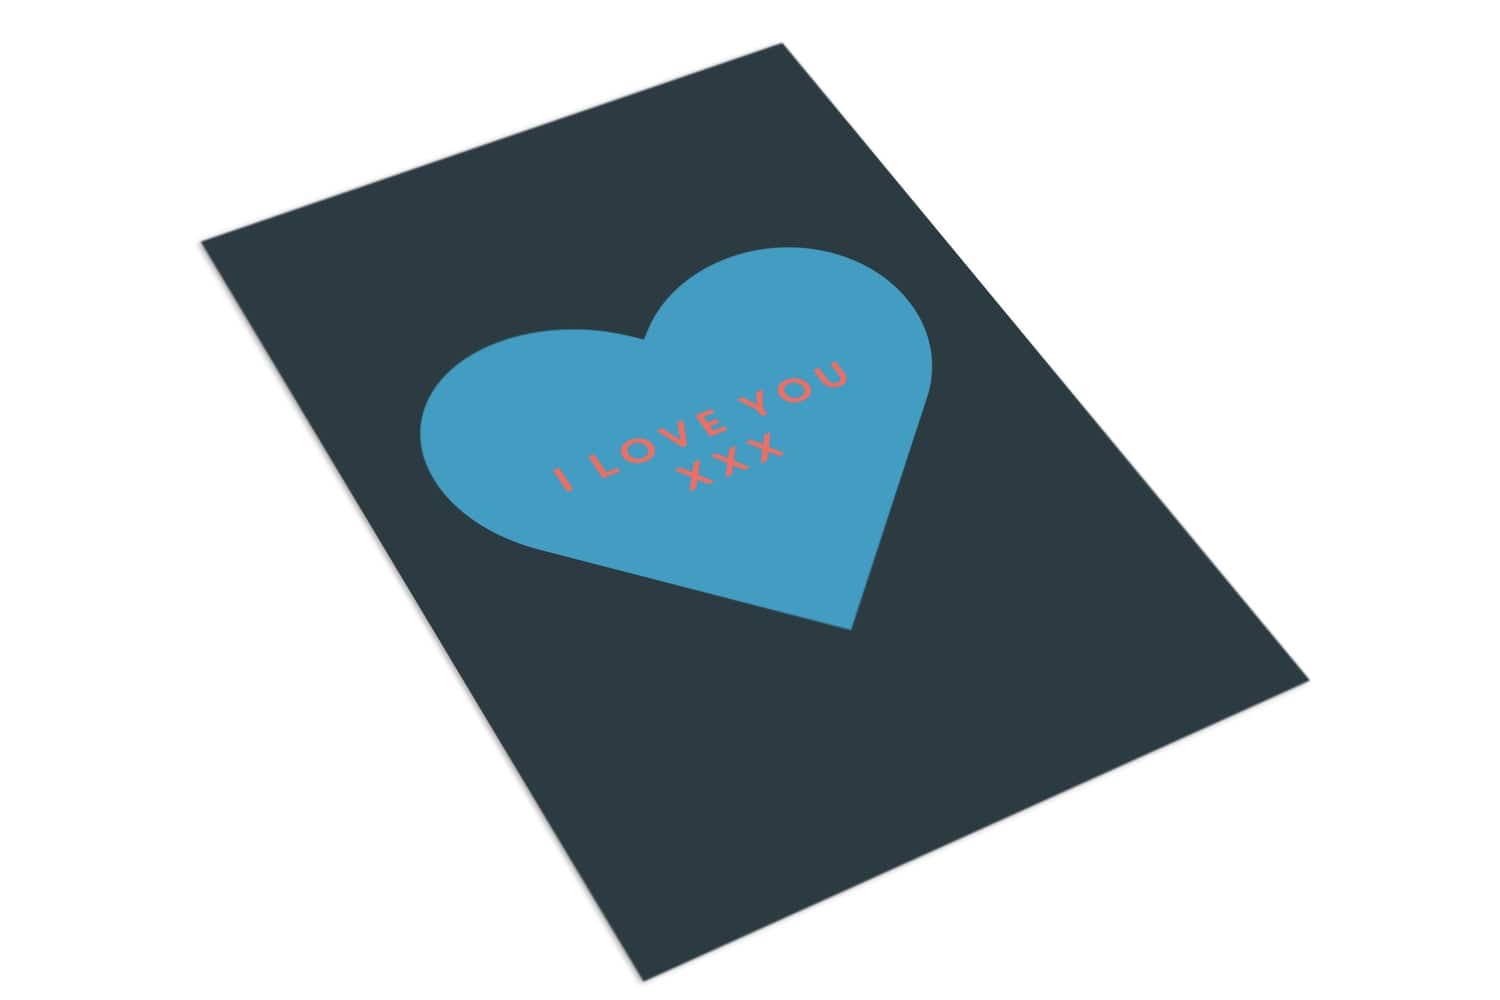 I Love You - The Paper People Greeting Cards